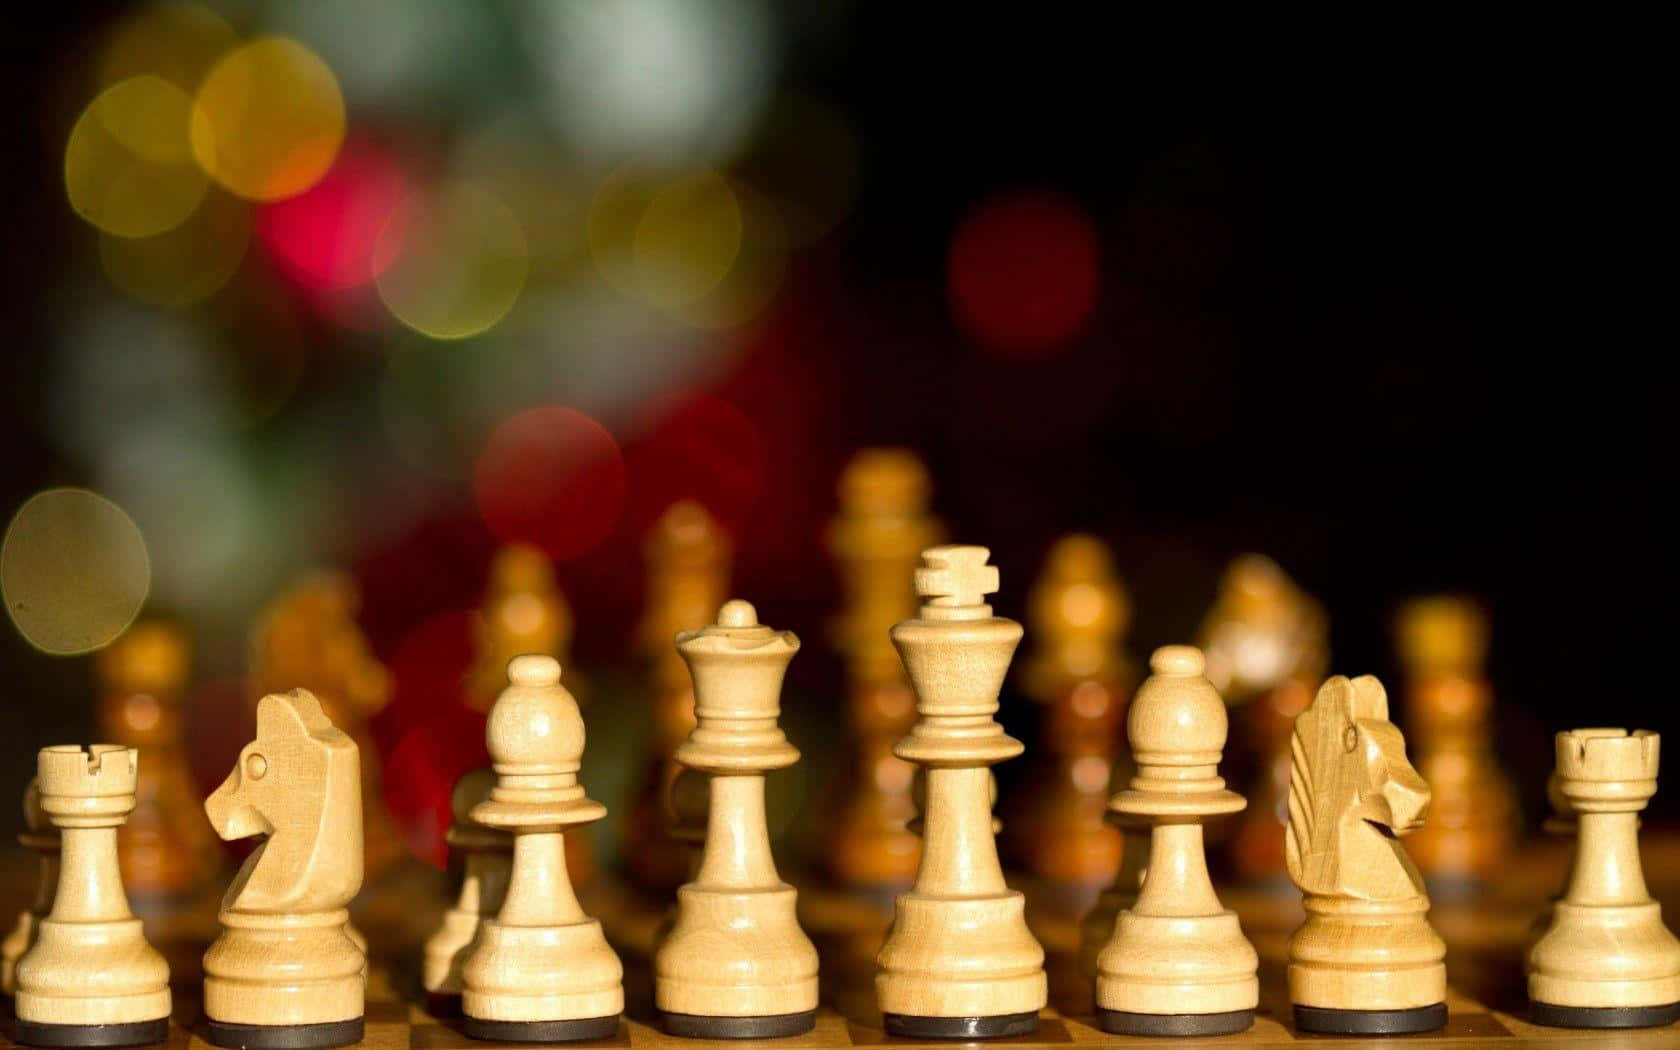 Chess Pieces On A Wooden Board With Bokeh Background